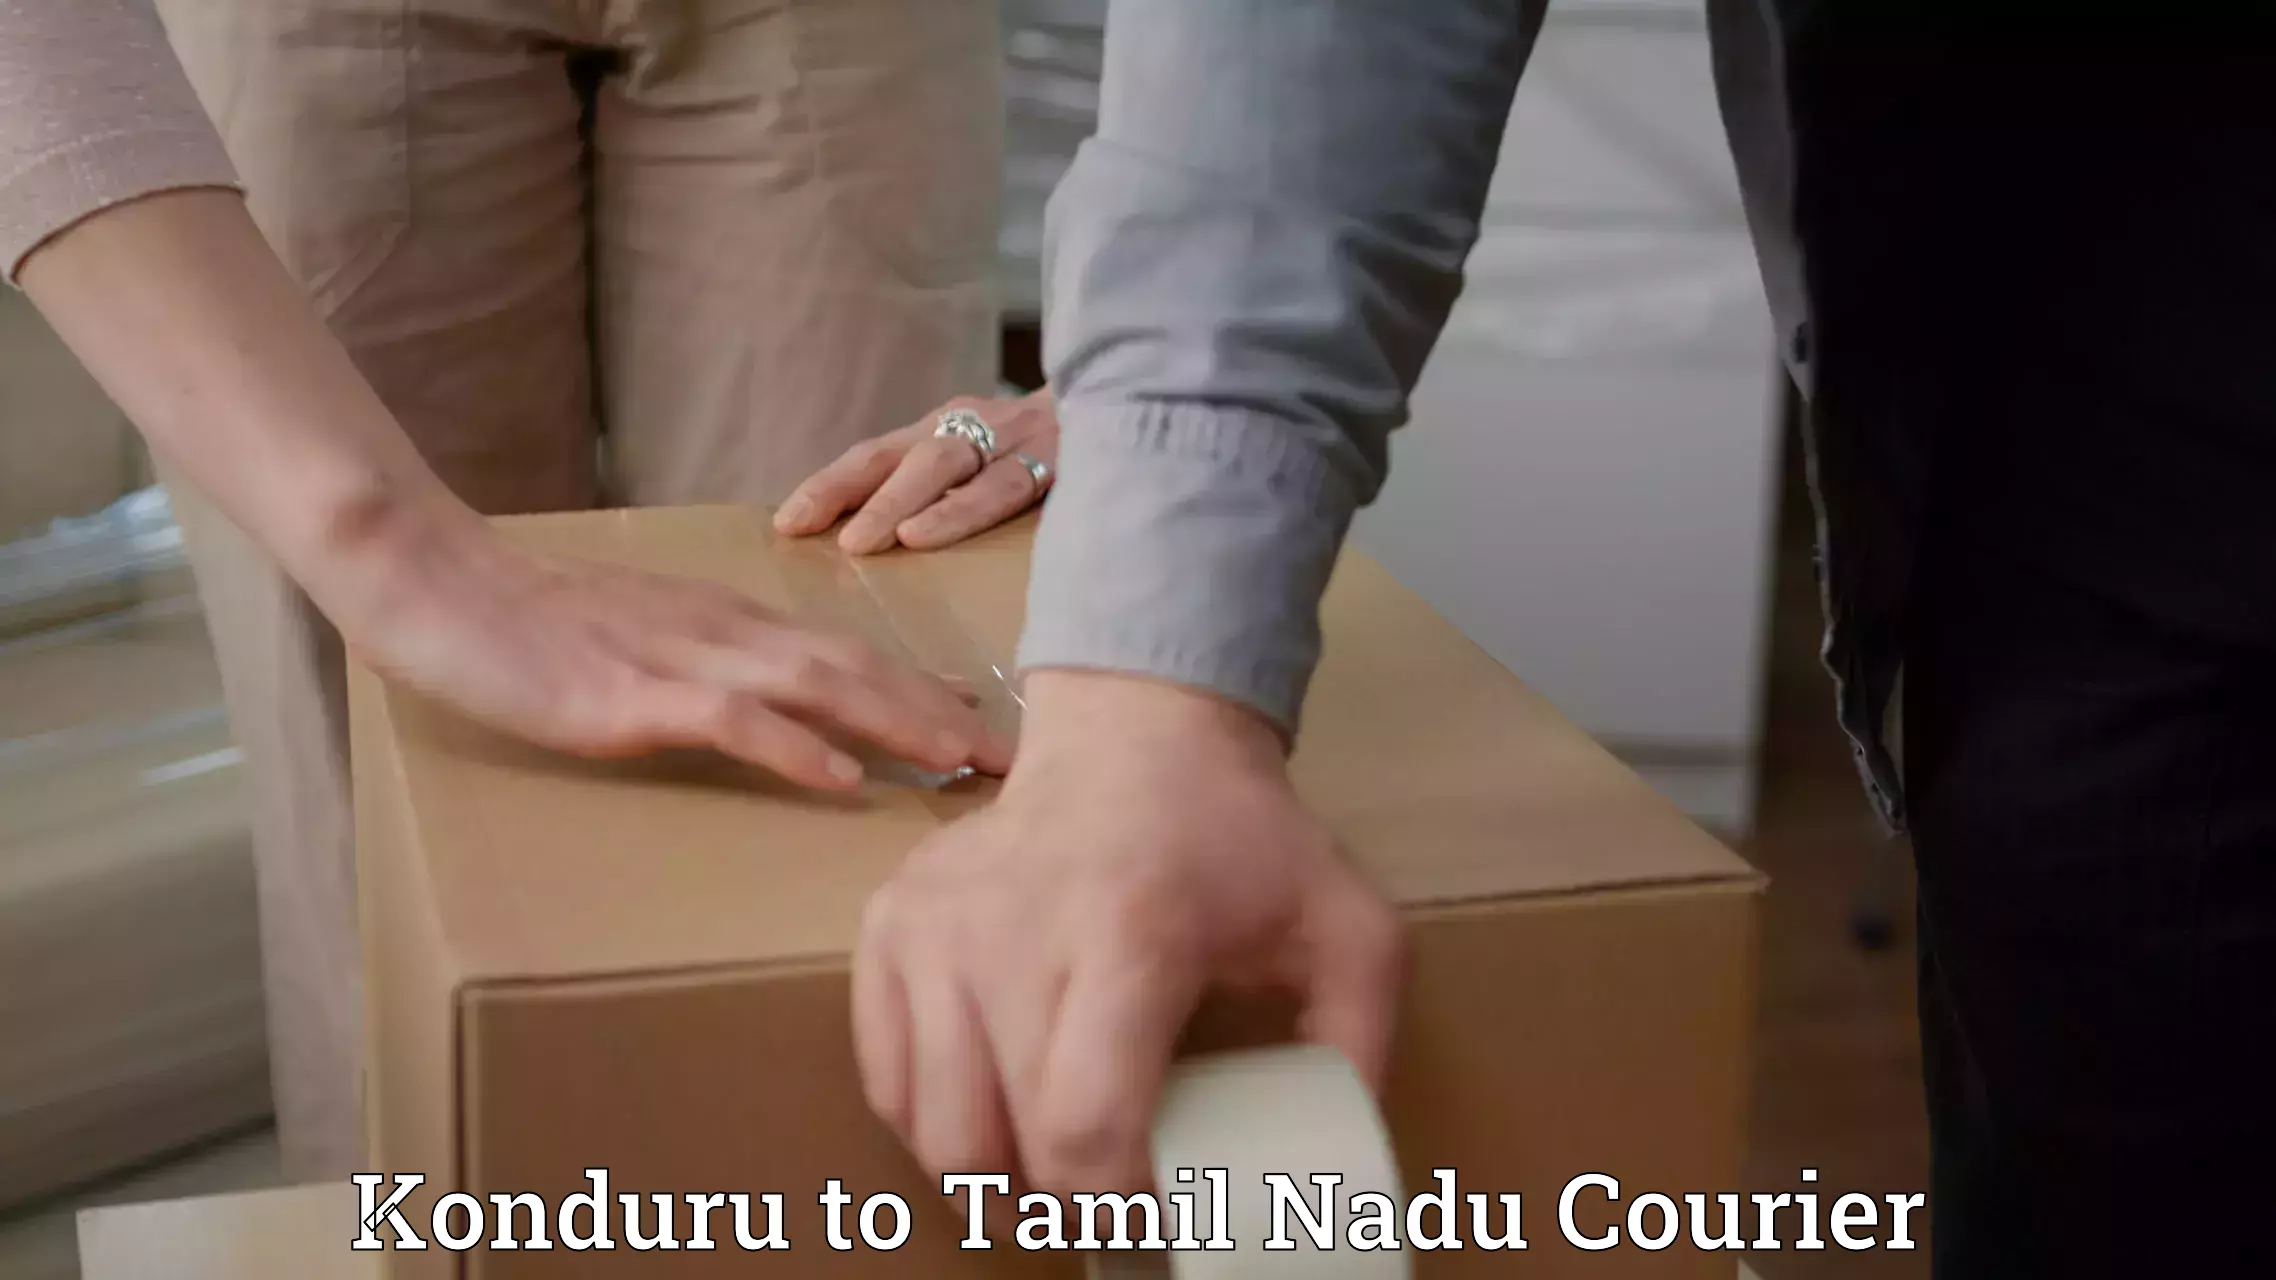 Easy access courier services in Konduru to Dindigul